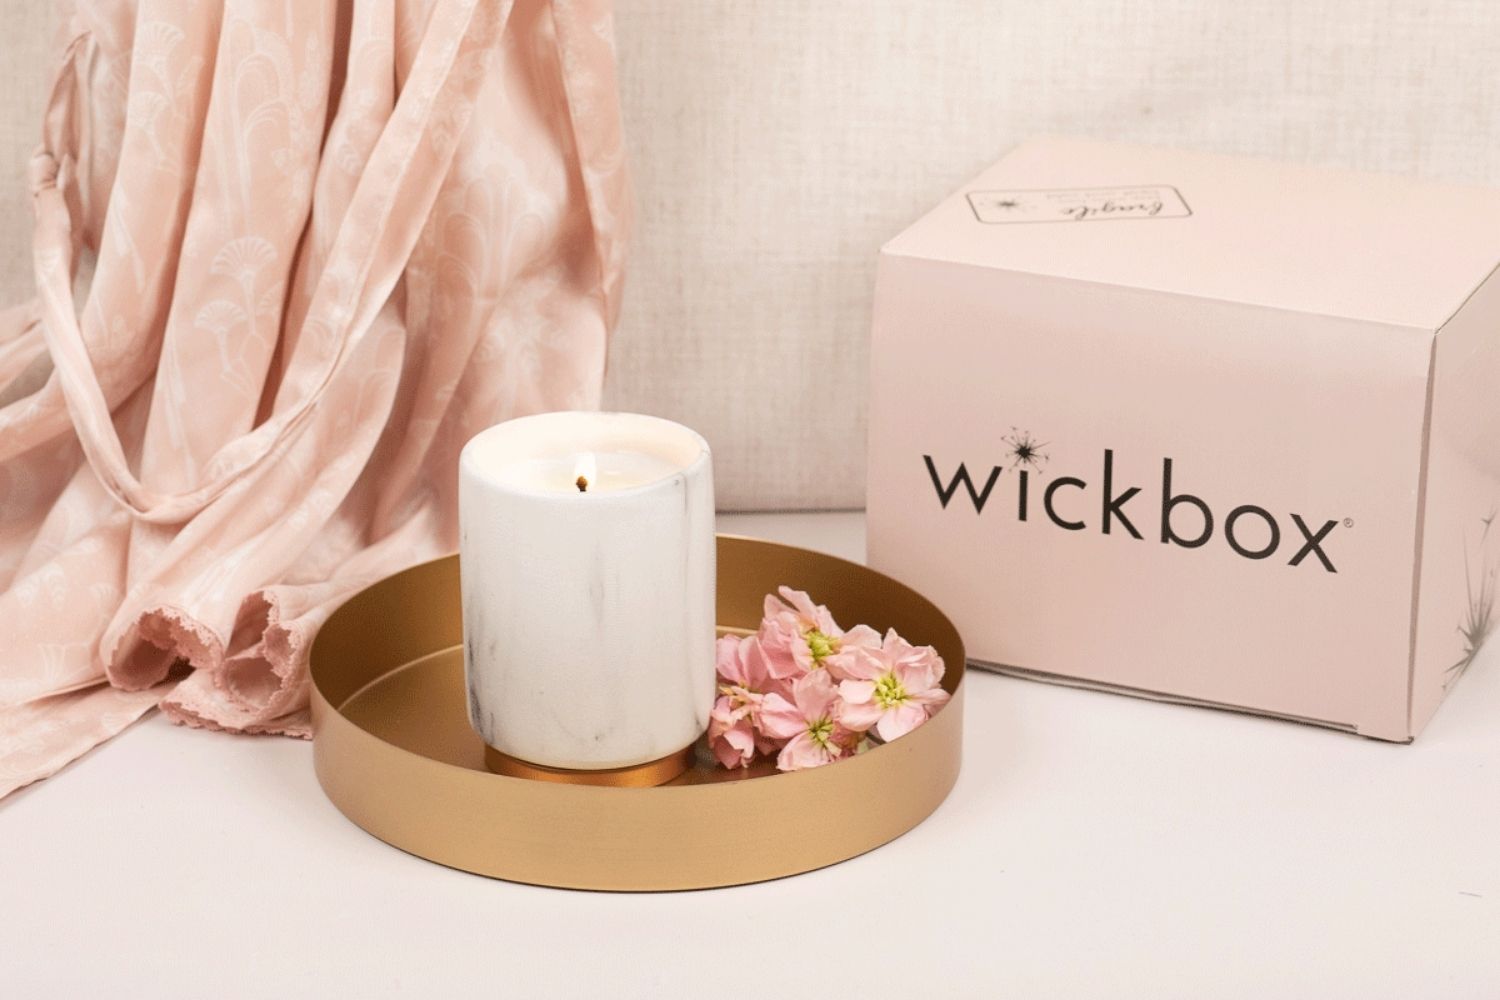 The Best Subscription Gifts Options: Wickbox Subscription